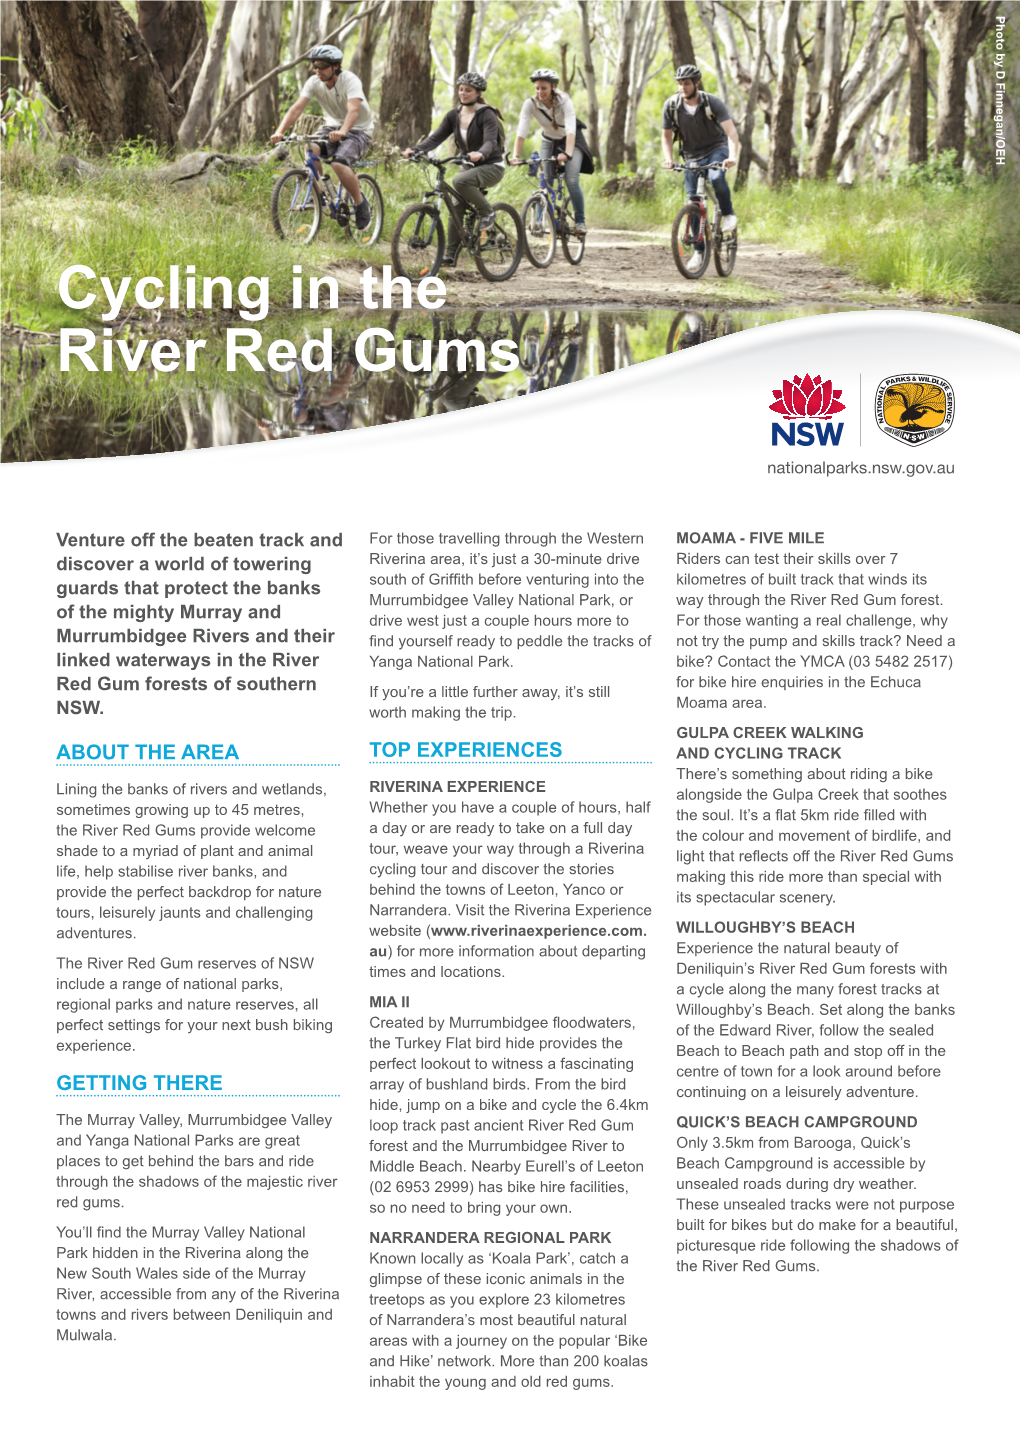 Cycling in the River Red Gums